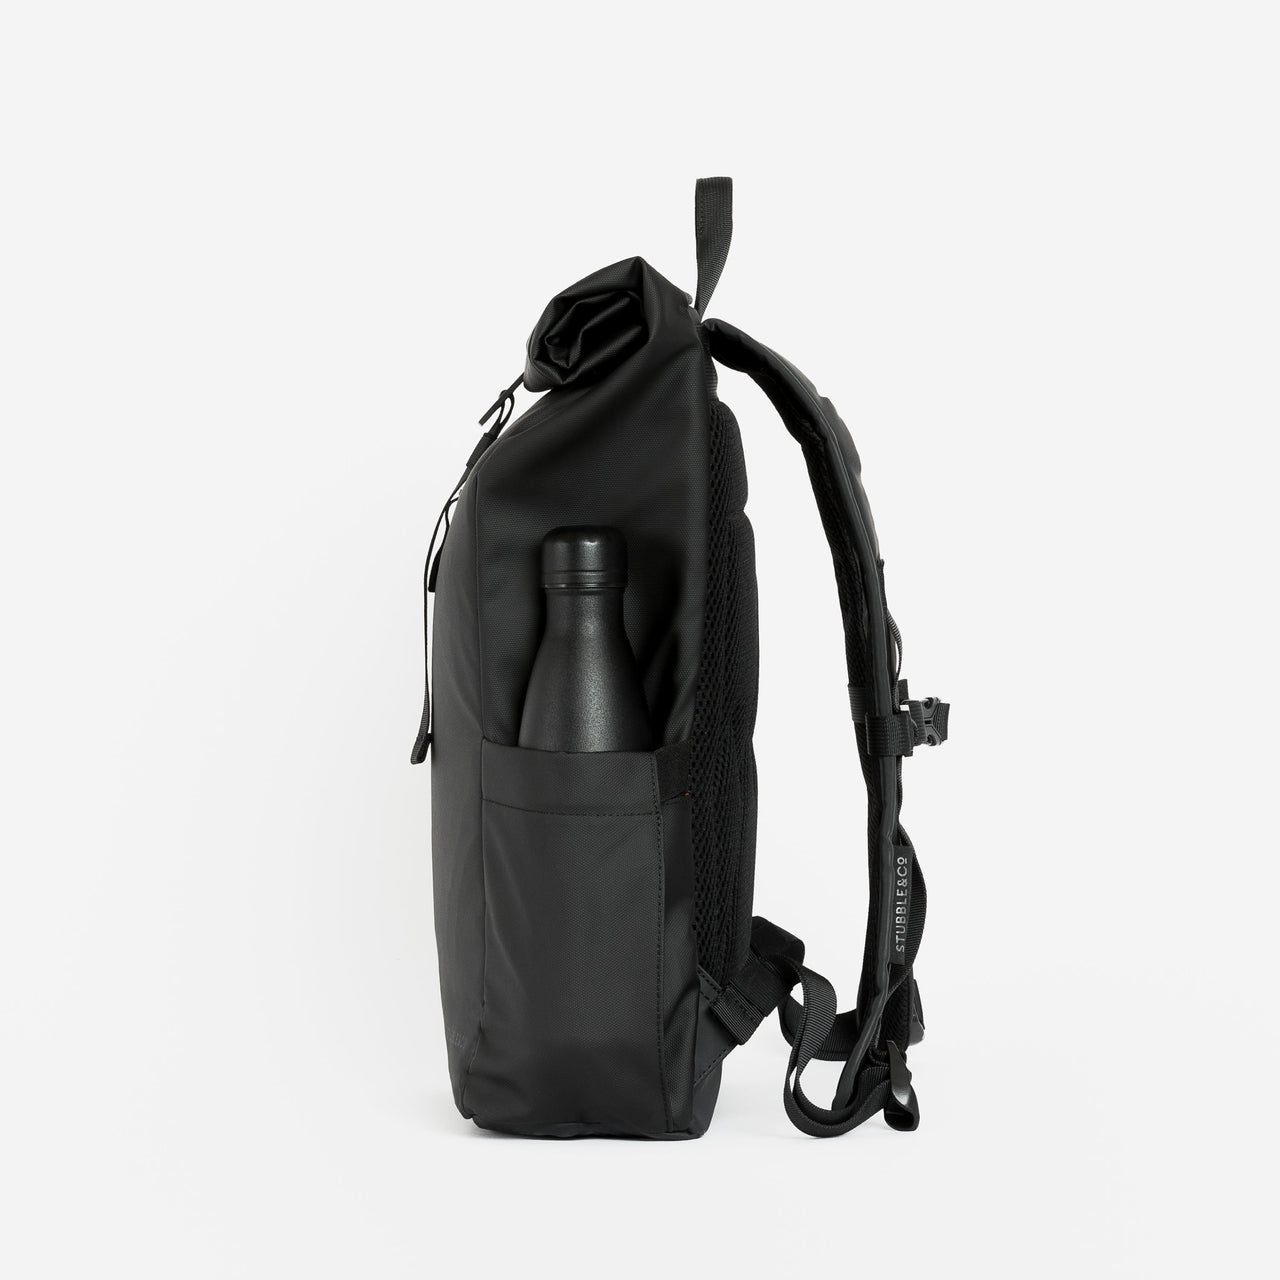 19 Best Backpacks with Water Bottle Pockets - Tested and Reviewed